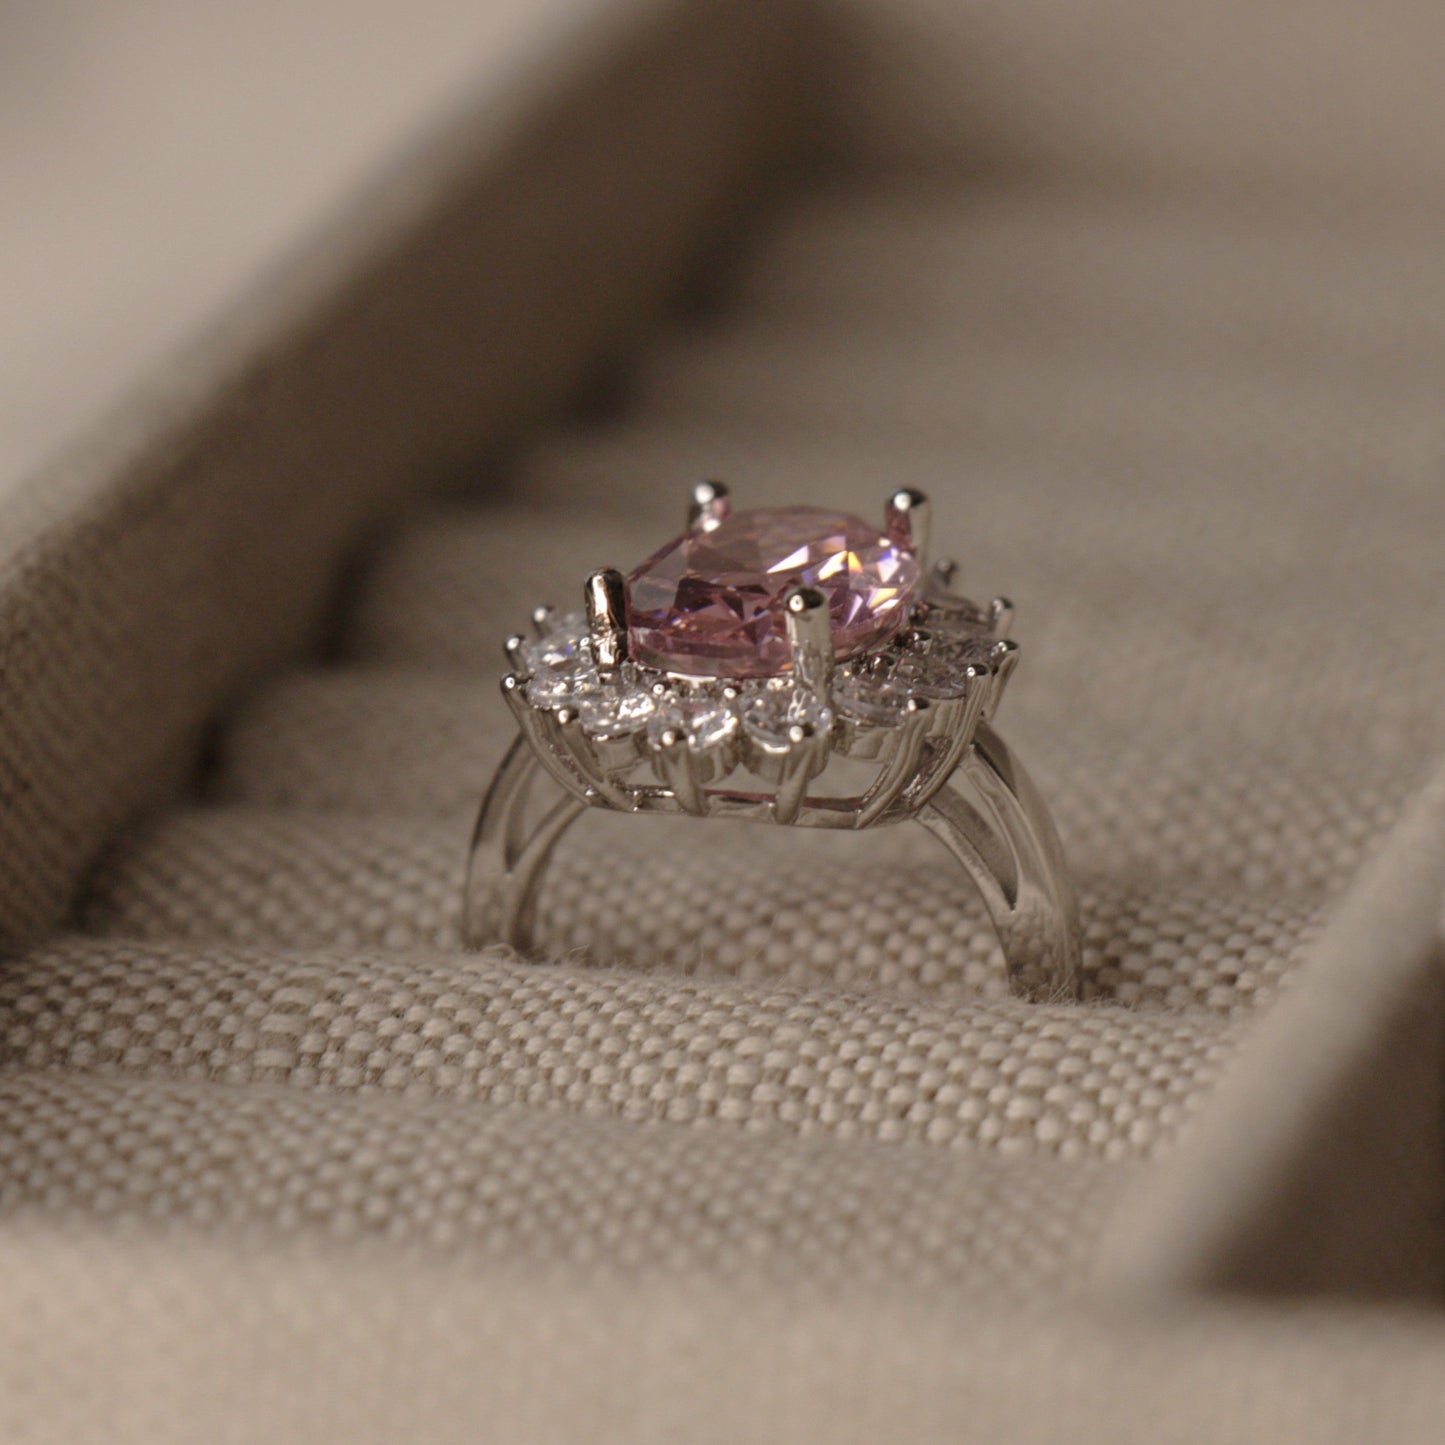 Our large pink oval sapphire set in a round diamond halo is reminiscent of a daisy is in the style of Lady Gaga's pink sapphire engagement ring given to her by Christian Carino.